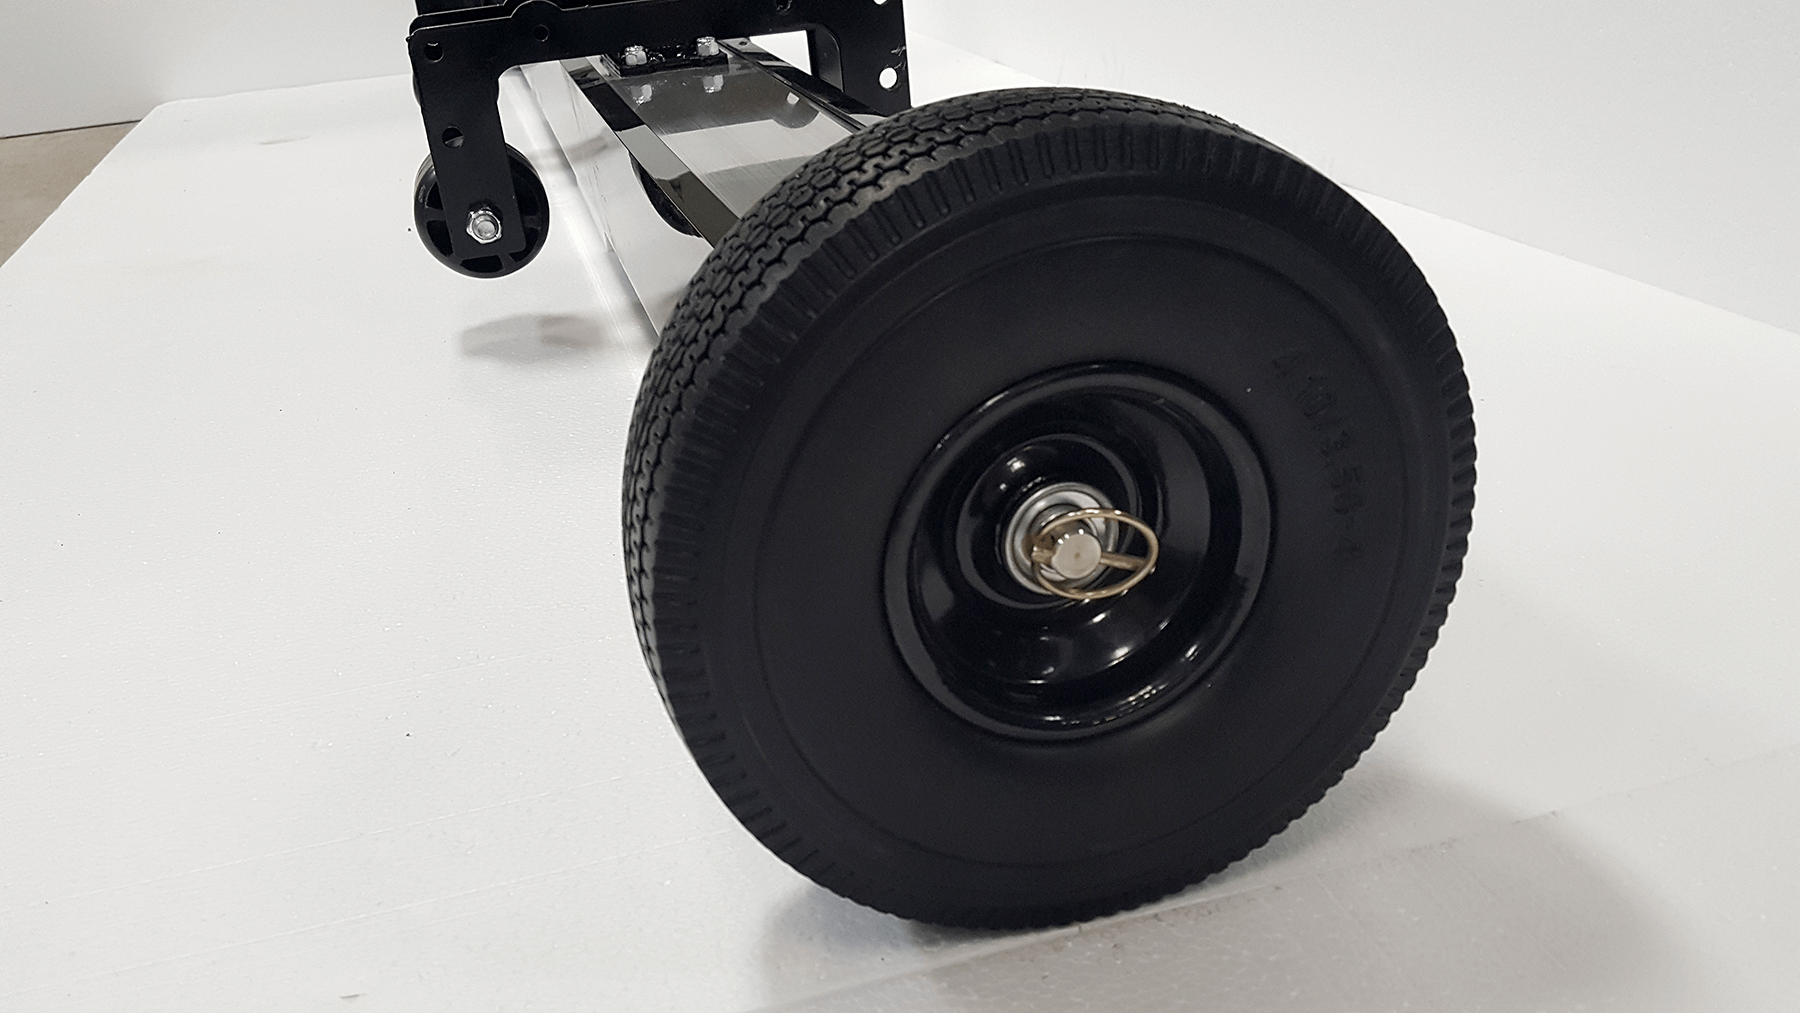 Aether magnetic sweeper flat proof bump wheels